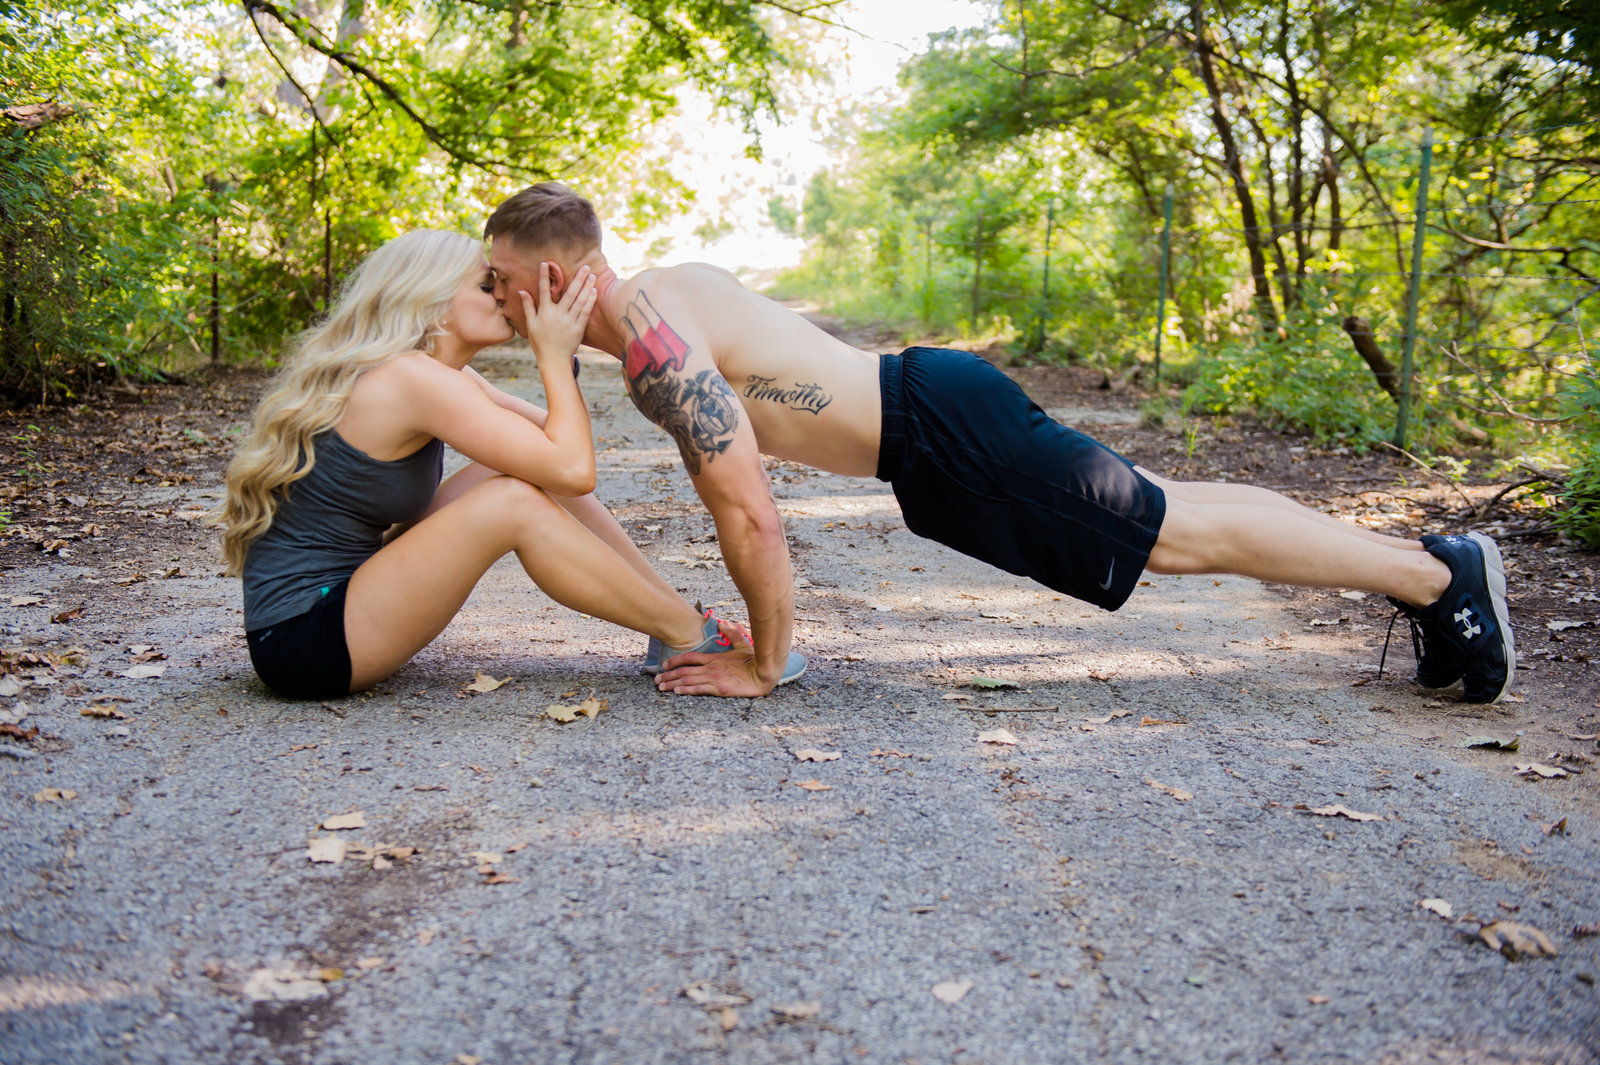 Workout engagement photo by Brittany Barclay Photography